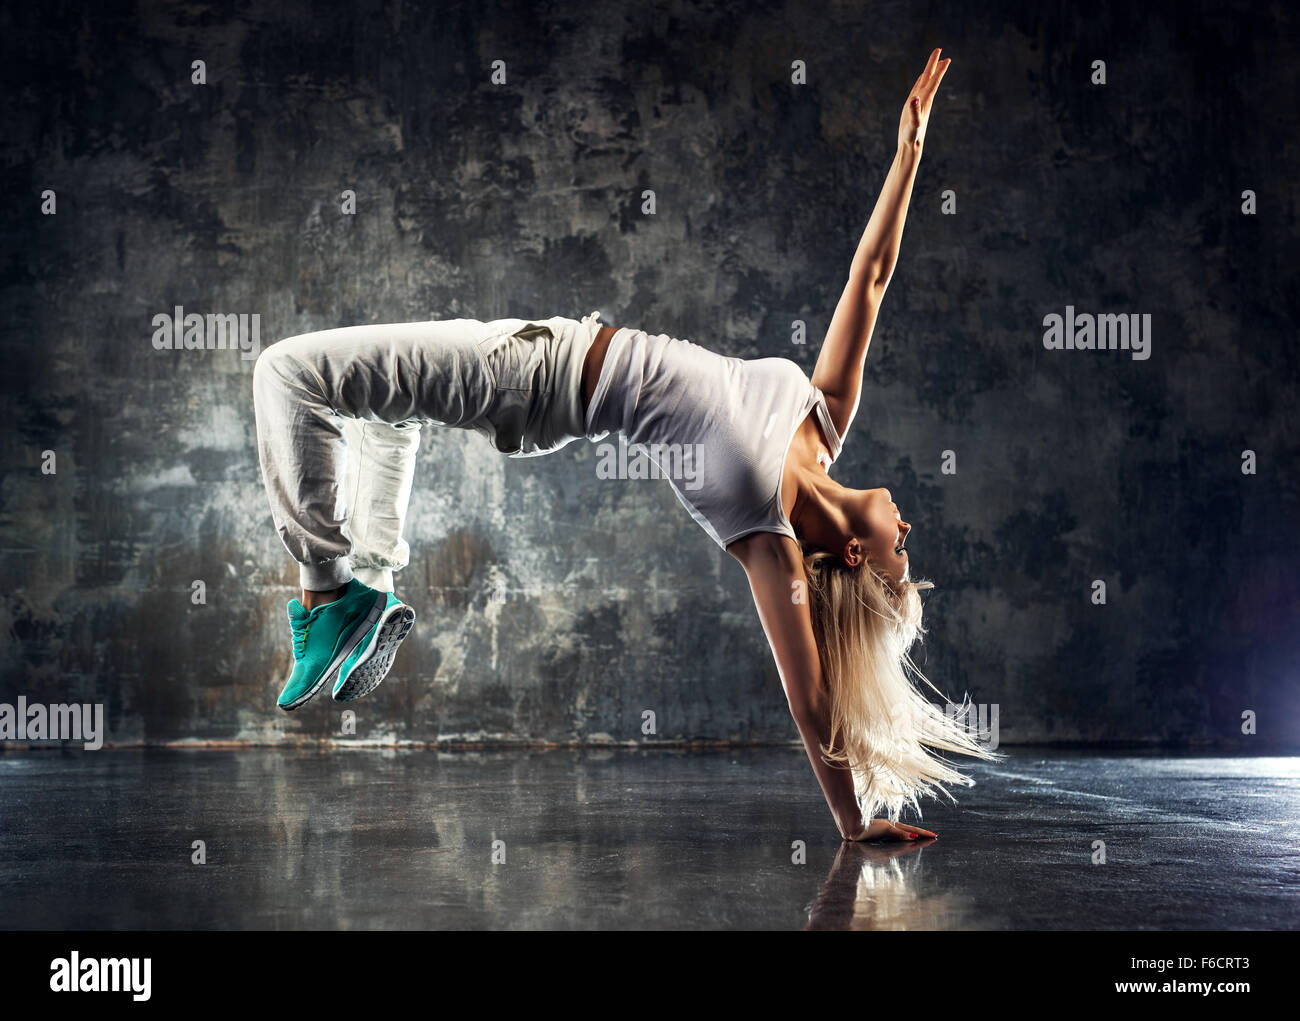 Young woman modern dancer. On dark stone wall background. Stock Photo